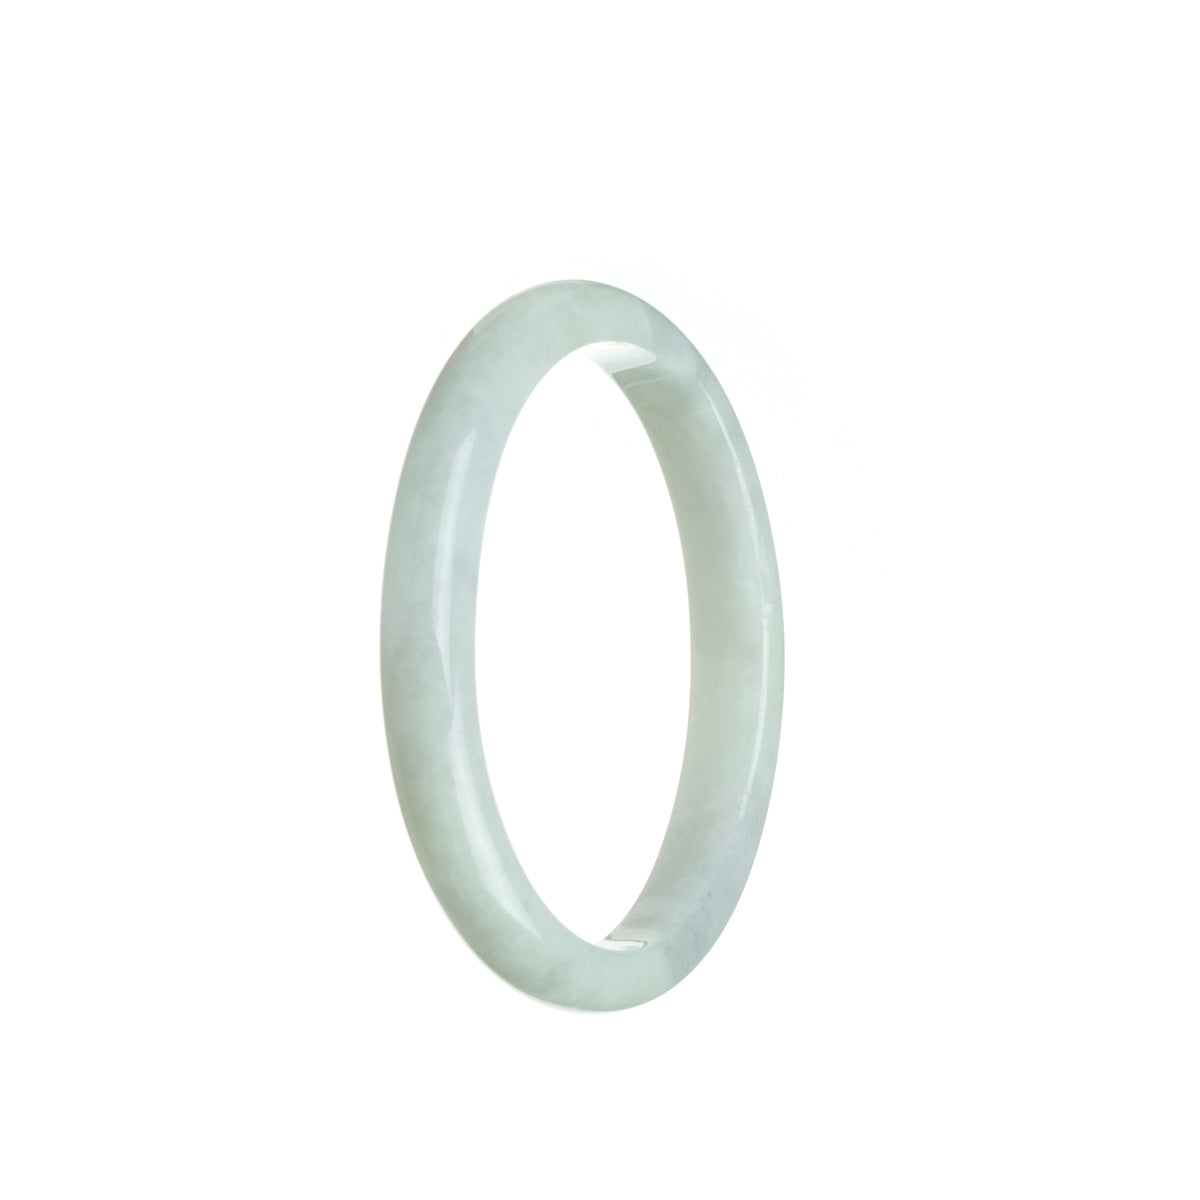 Real Grade A Pale Green with hints of Lavender Jade Bangle - 54mm Oval